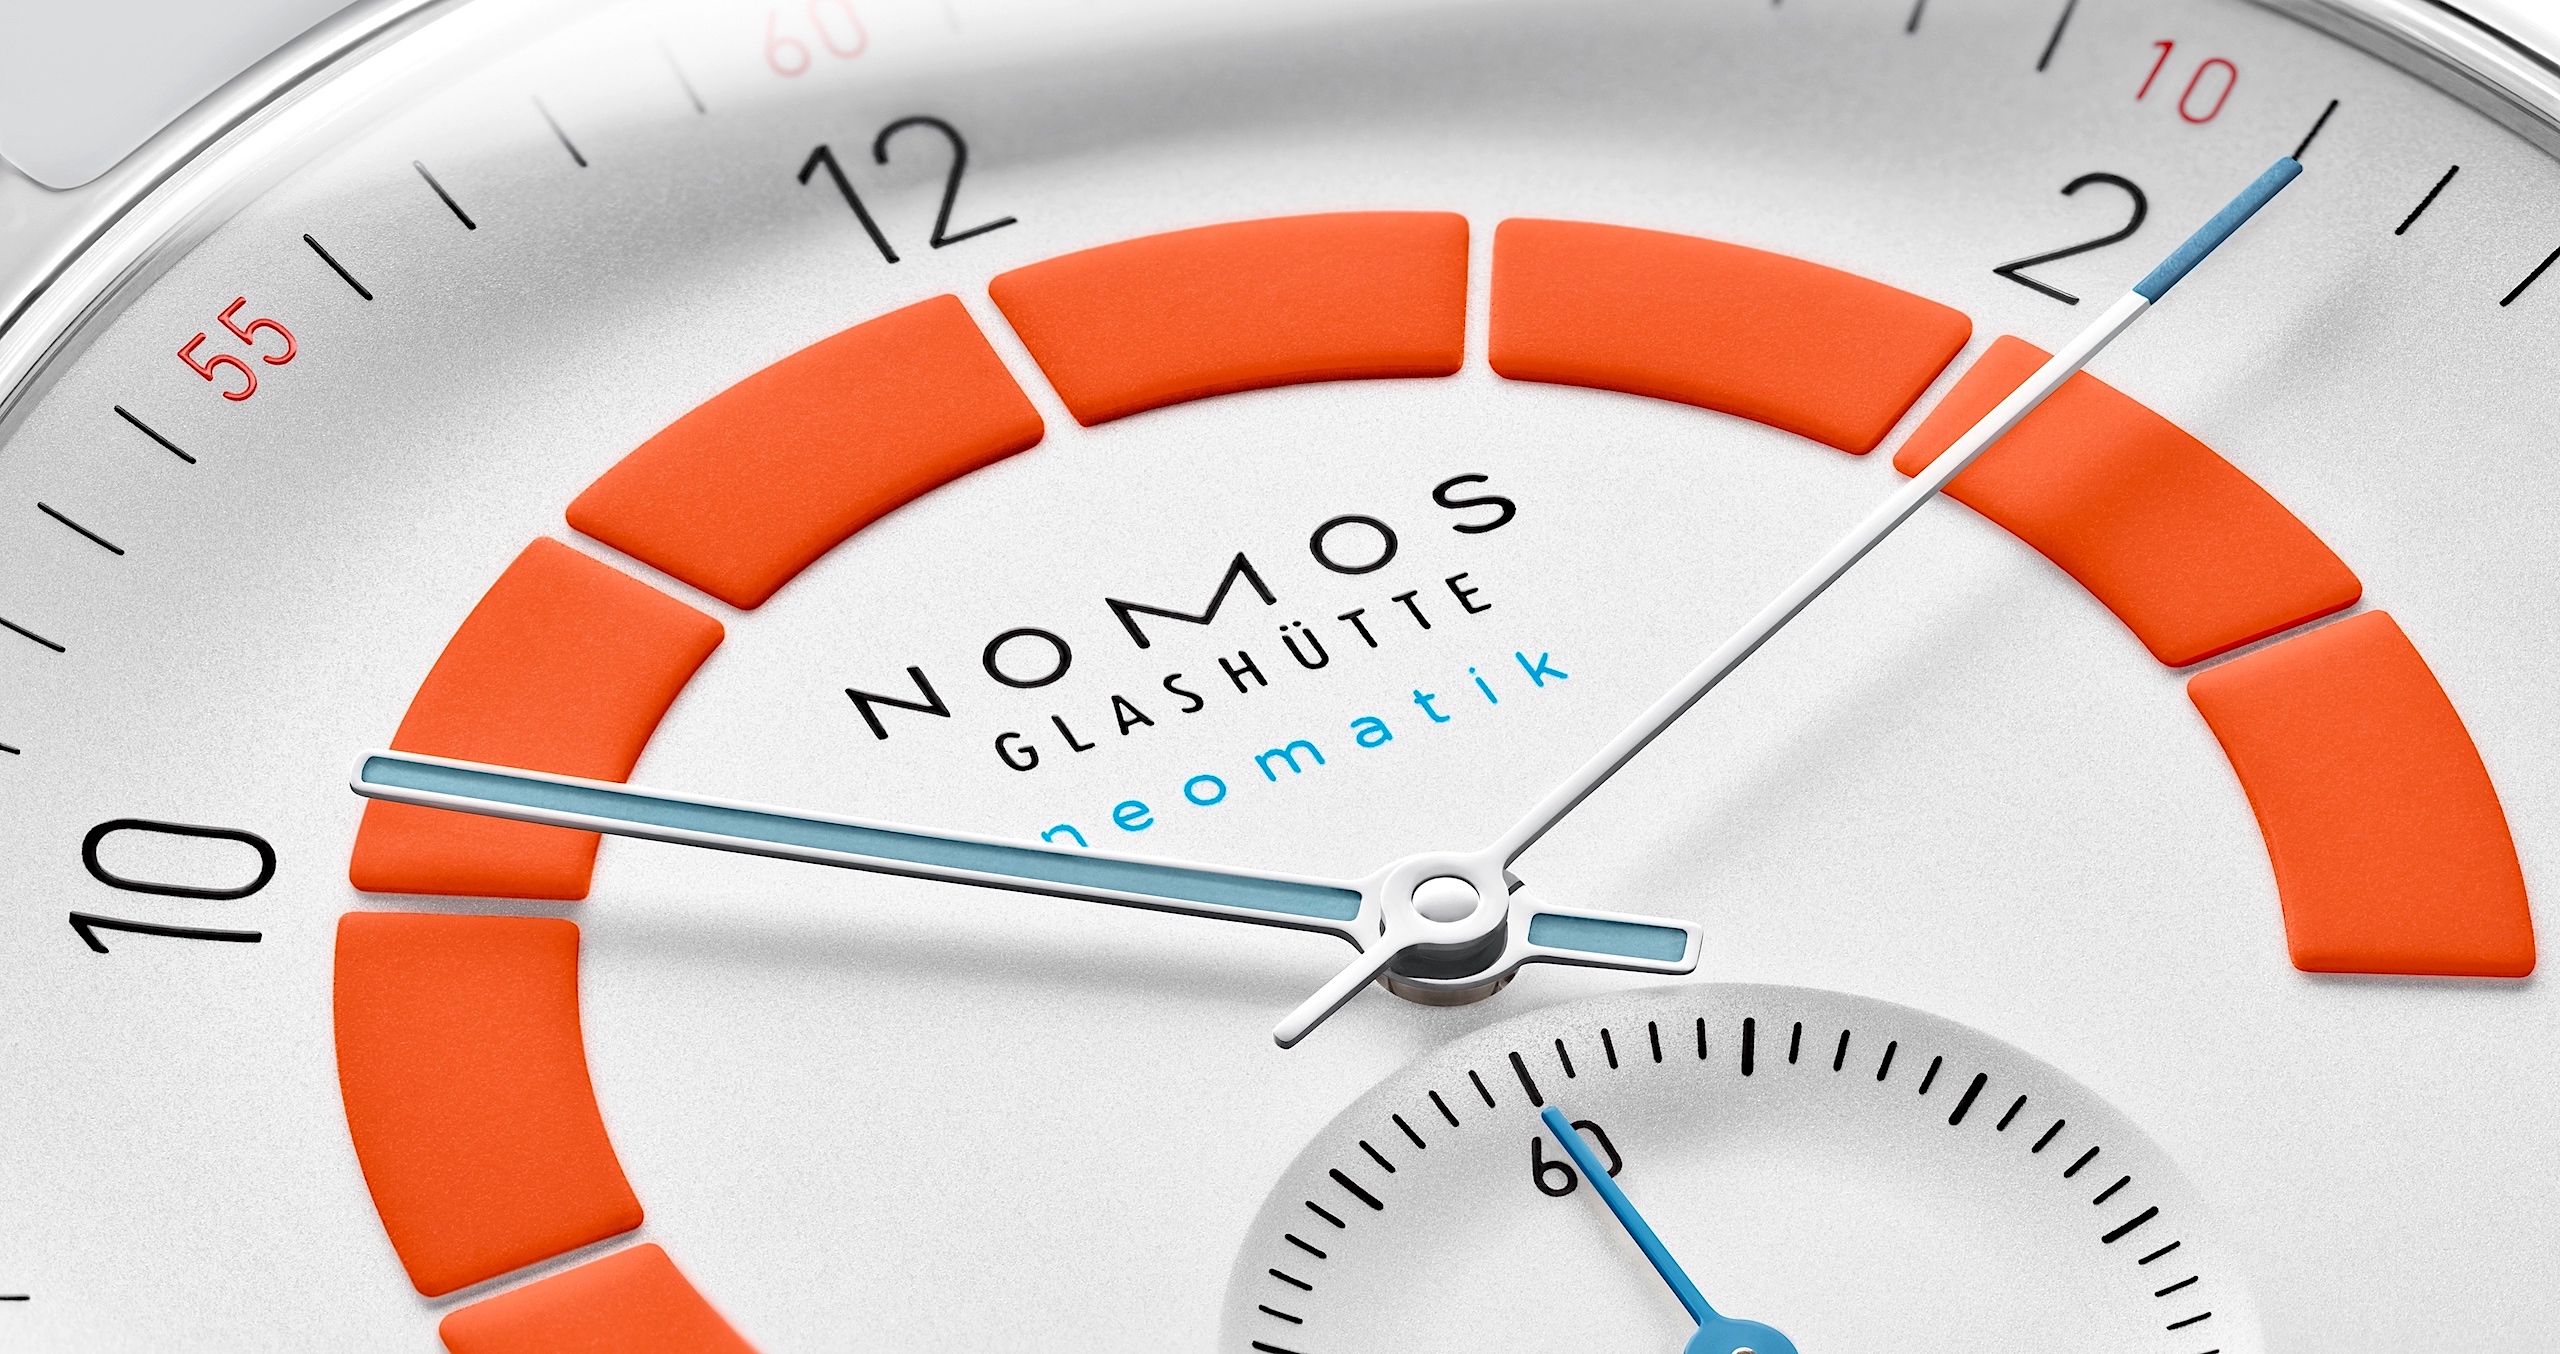 Nomos Autobahn Director's Cut Limited Edition - cover